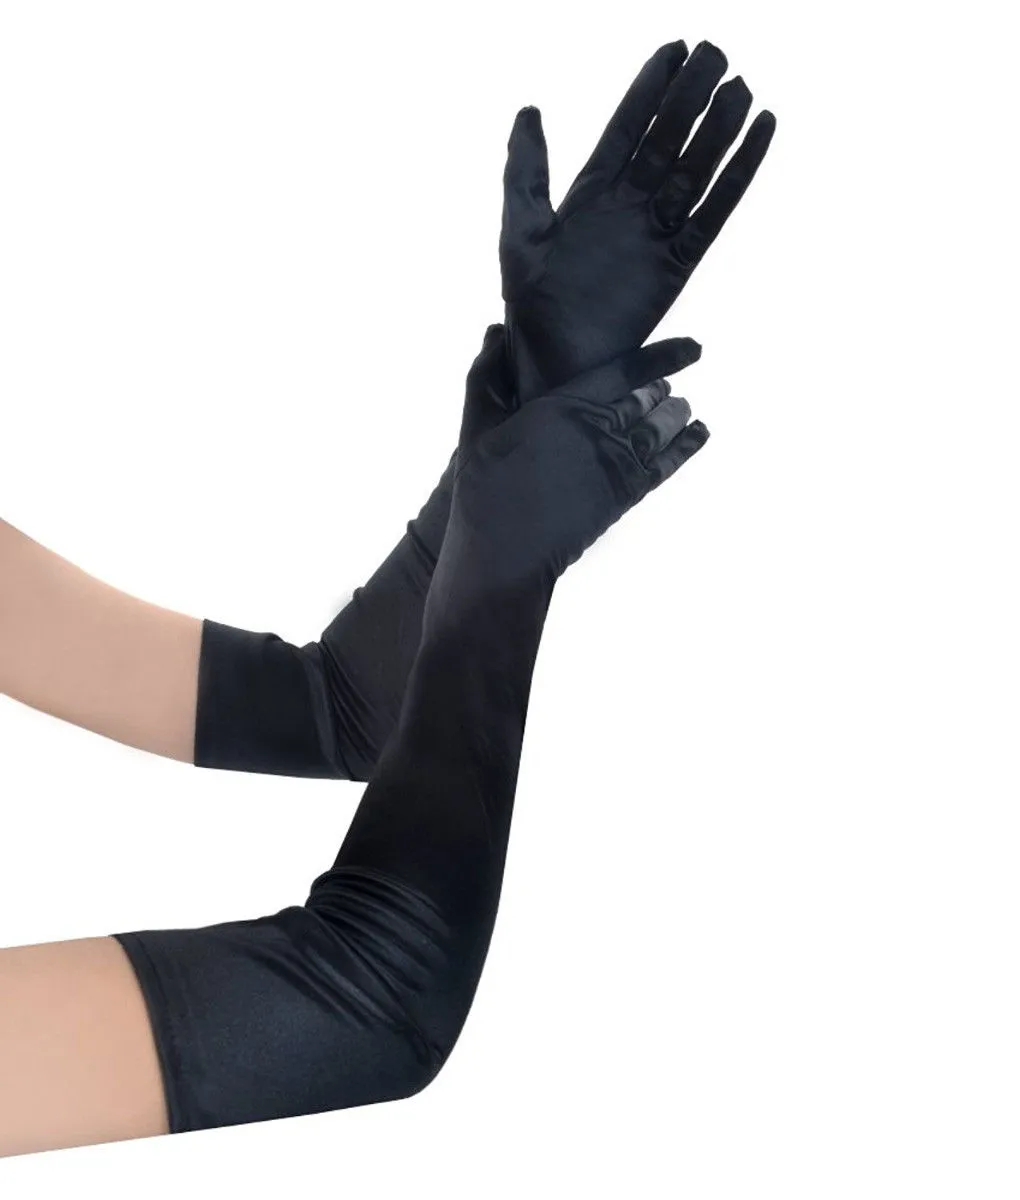 New Bride gloves in black and white bask long satin opera performances autumn winter wedding dress accessories6253267